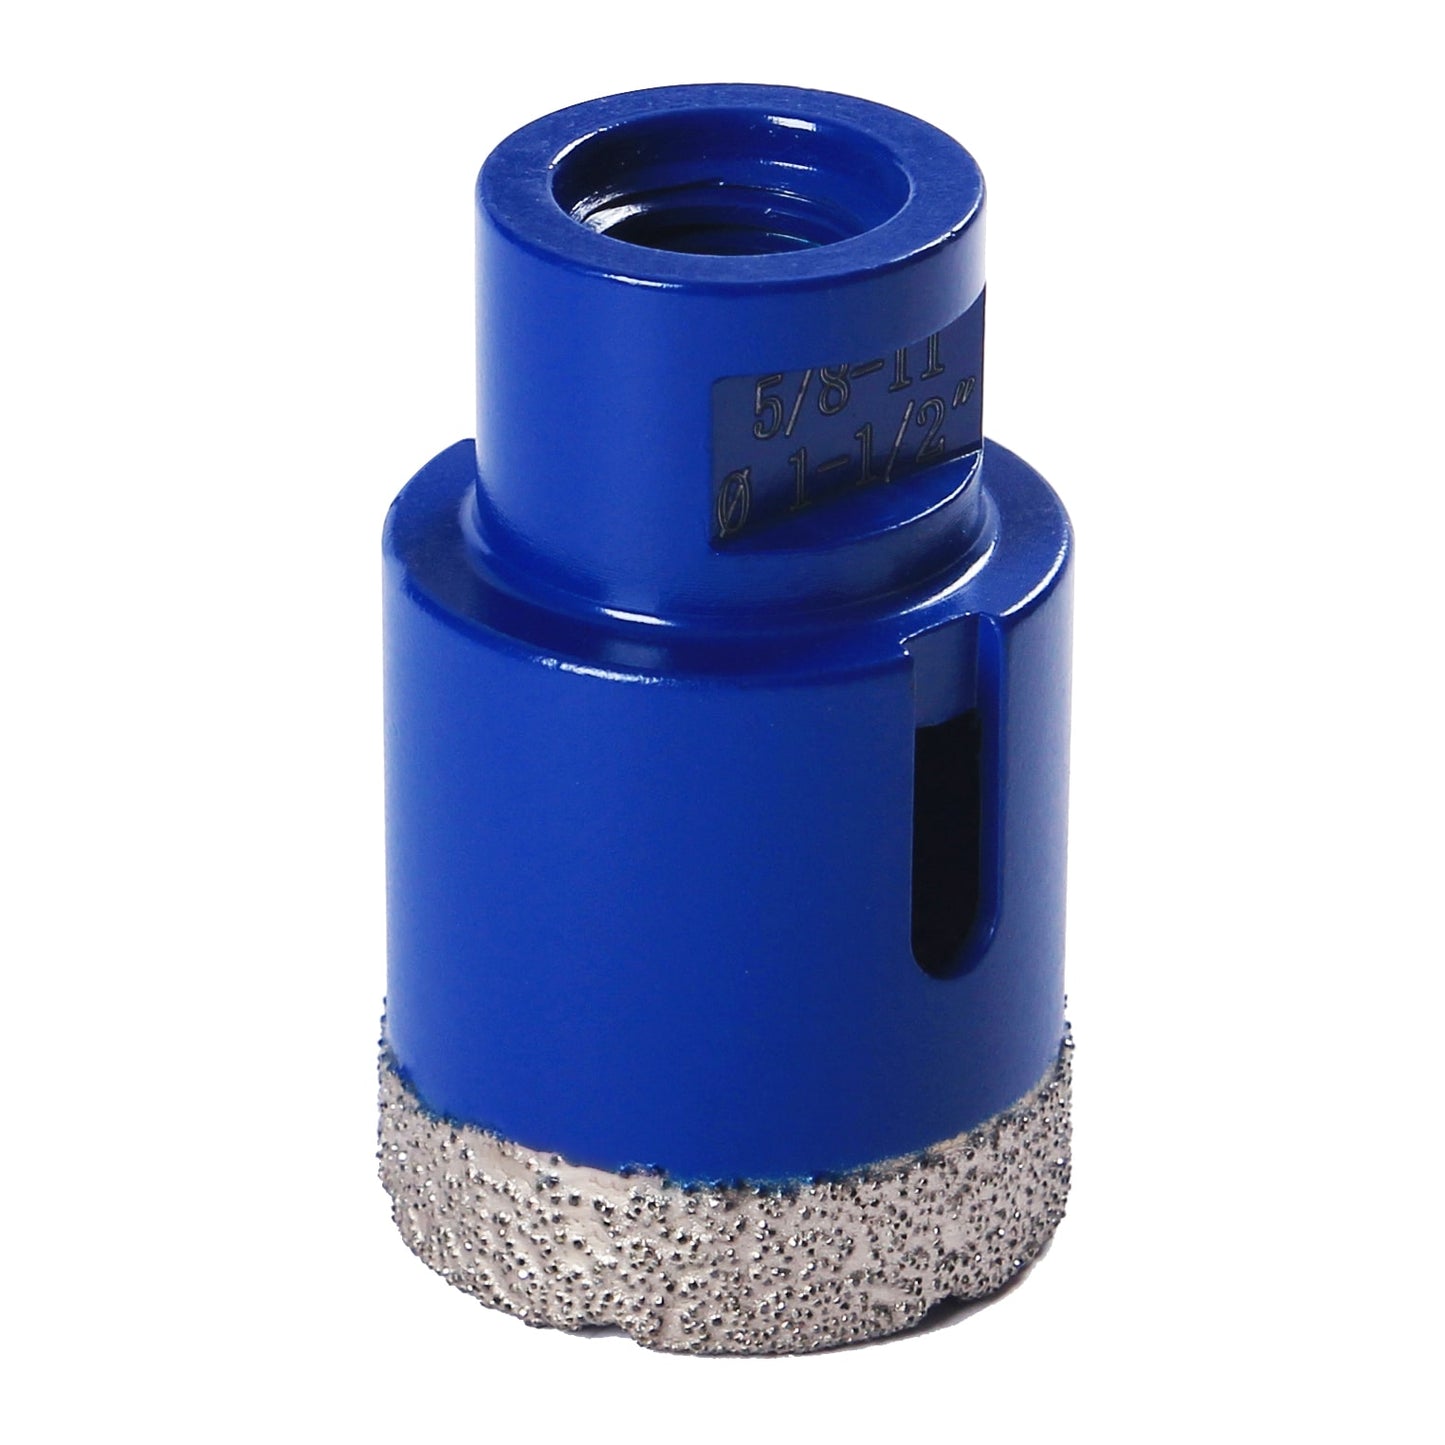 Heavy Duty Diamond Hole Saw Core Drill Bit 5/8-11 Inch Threaded Connection Professional Grade Sizes 1 inch to 4 inches